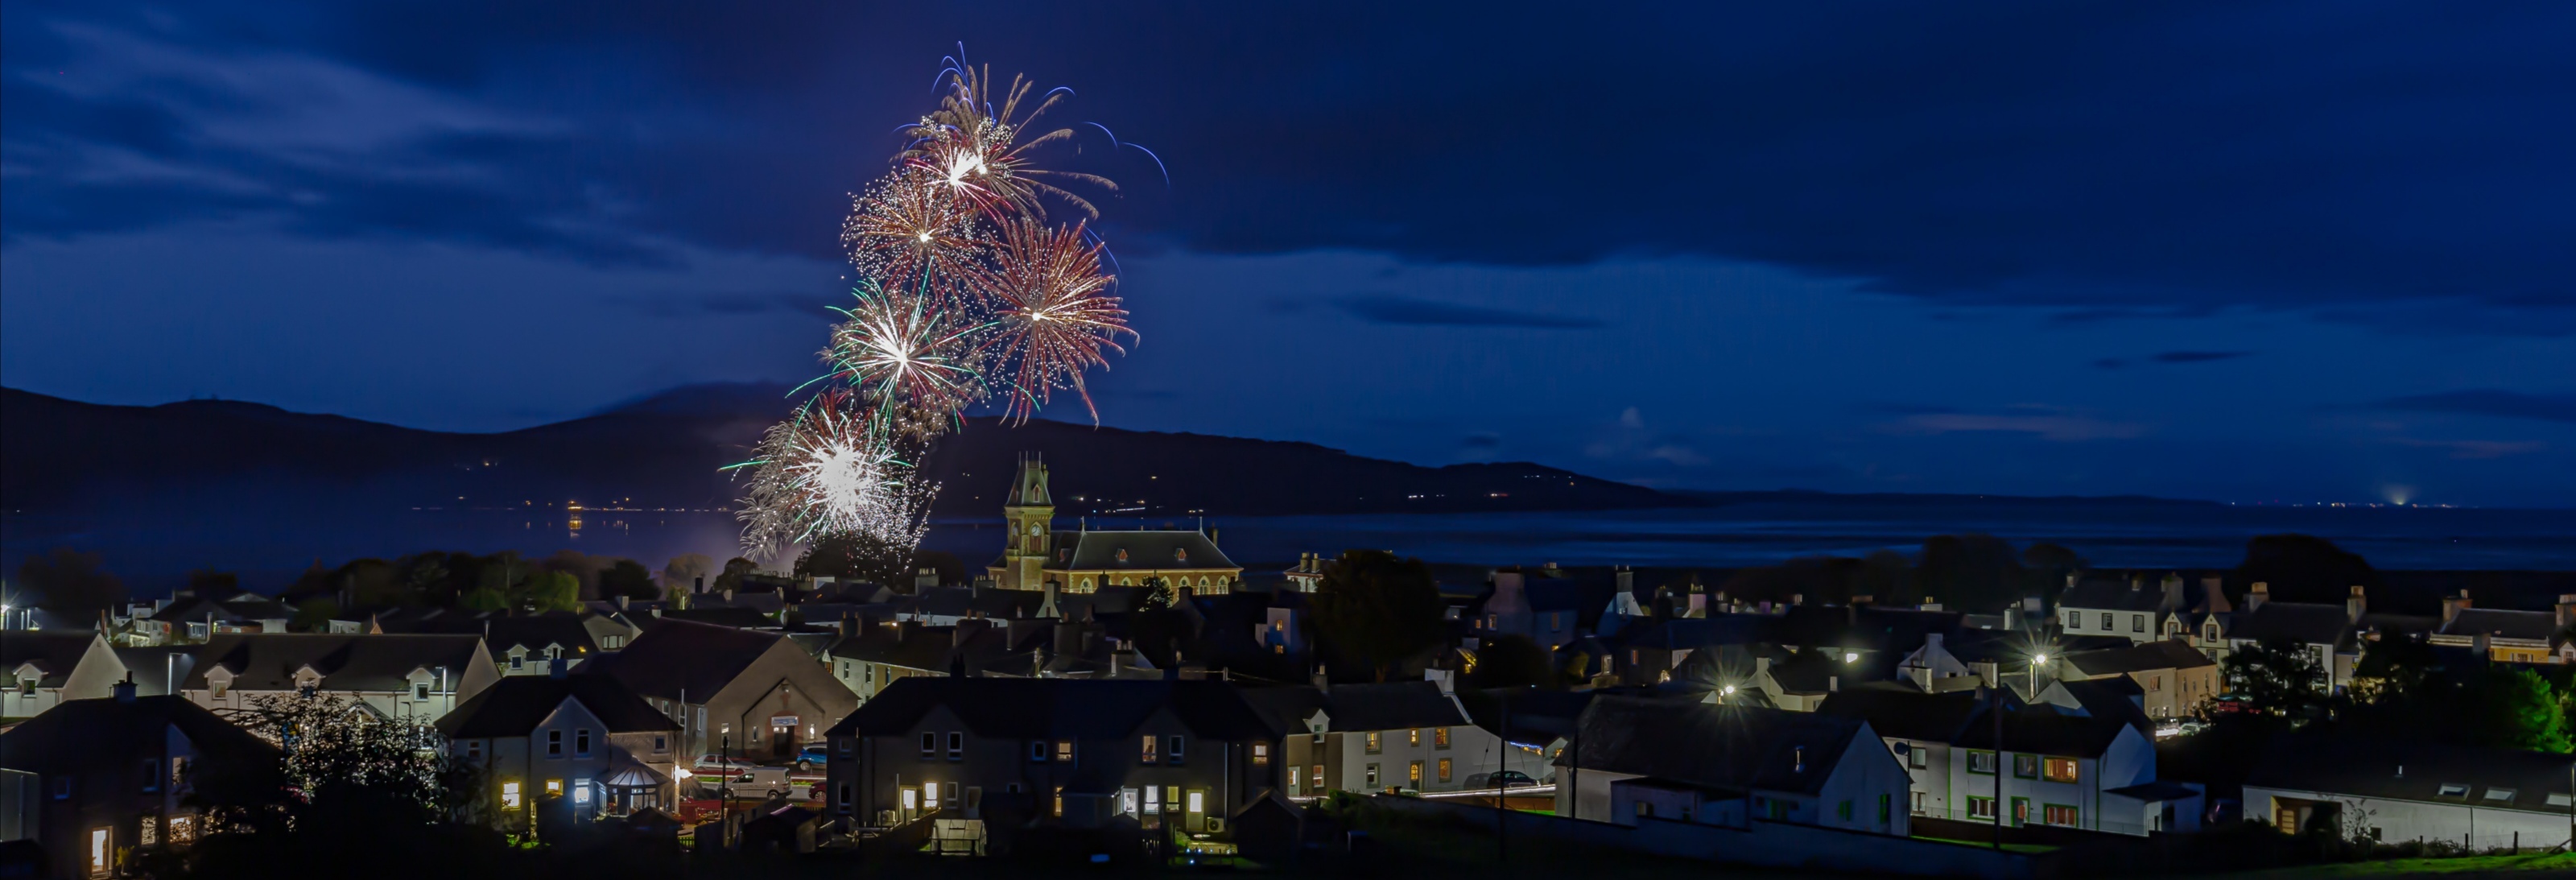 A rooftop view of Wigtown at night. Fireworks are exploding in the sky to celebrate the opening night of Wigtown Book Festival.